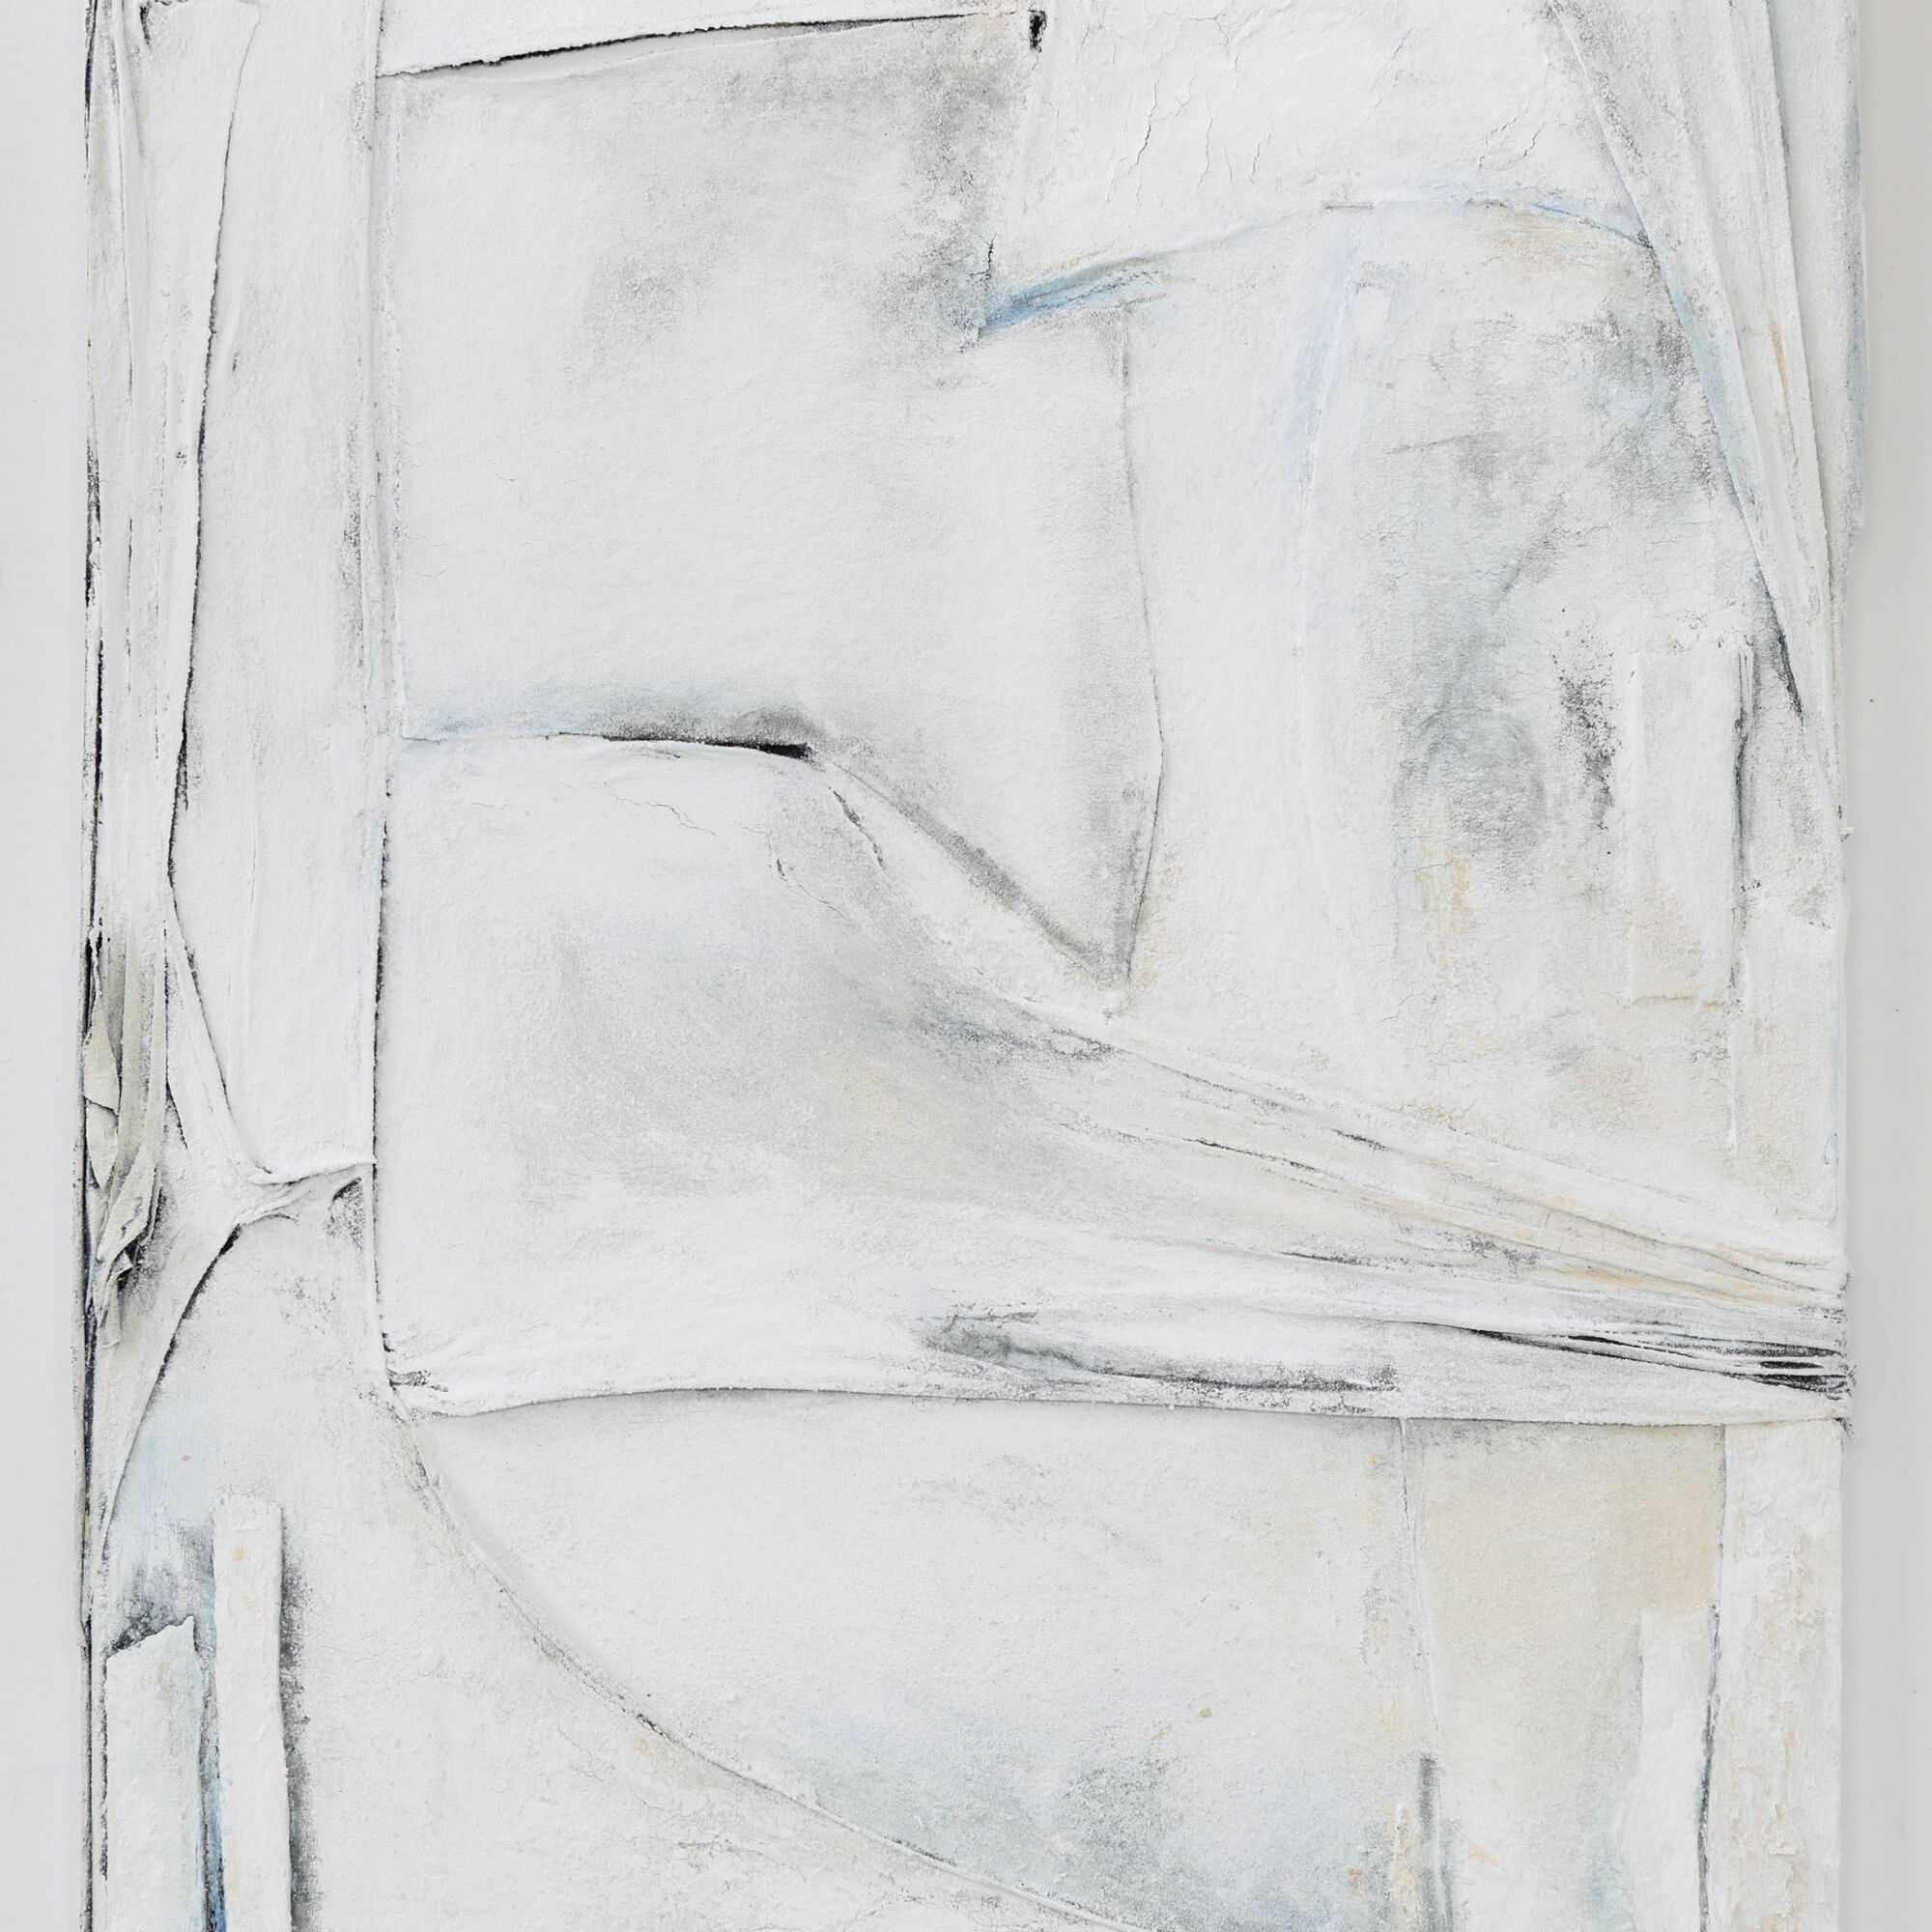 4.Anna Caione White On White II, 2018, fabric, pigment _ mixed media on canvas, 92cm x 51cm